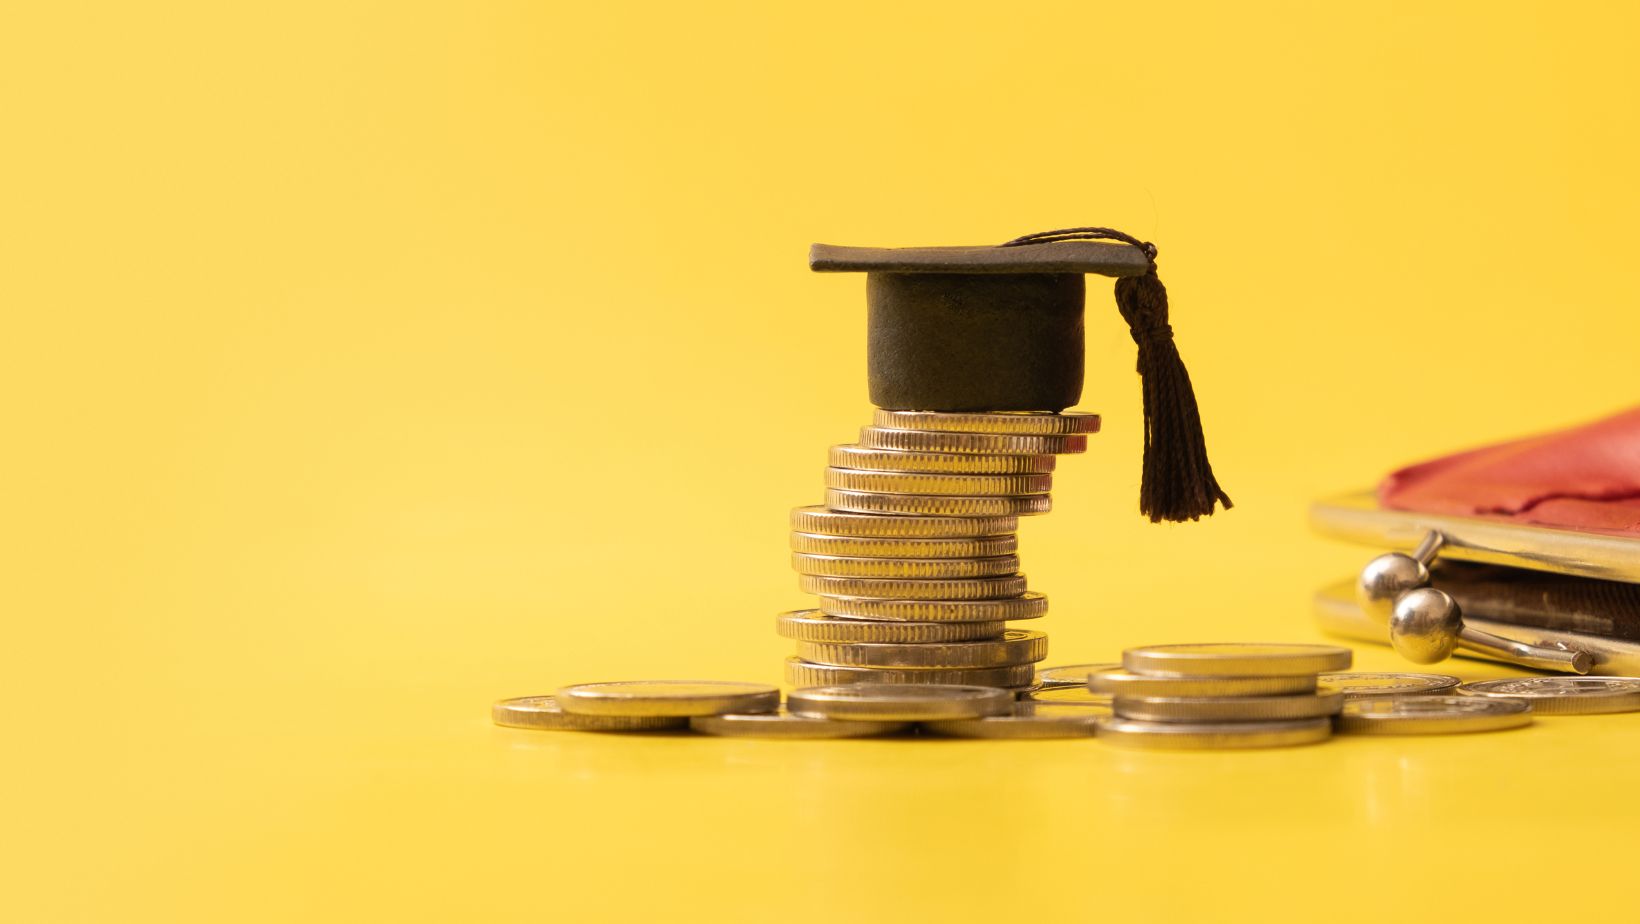 coins stacked with graduation cap for types of collateral loans for education